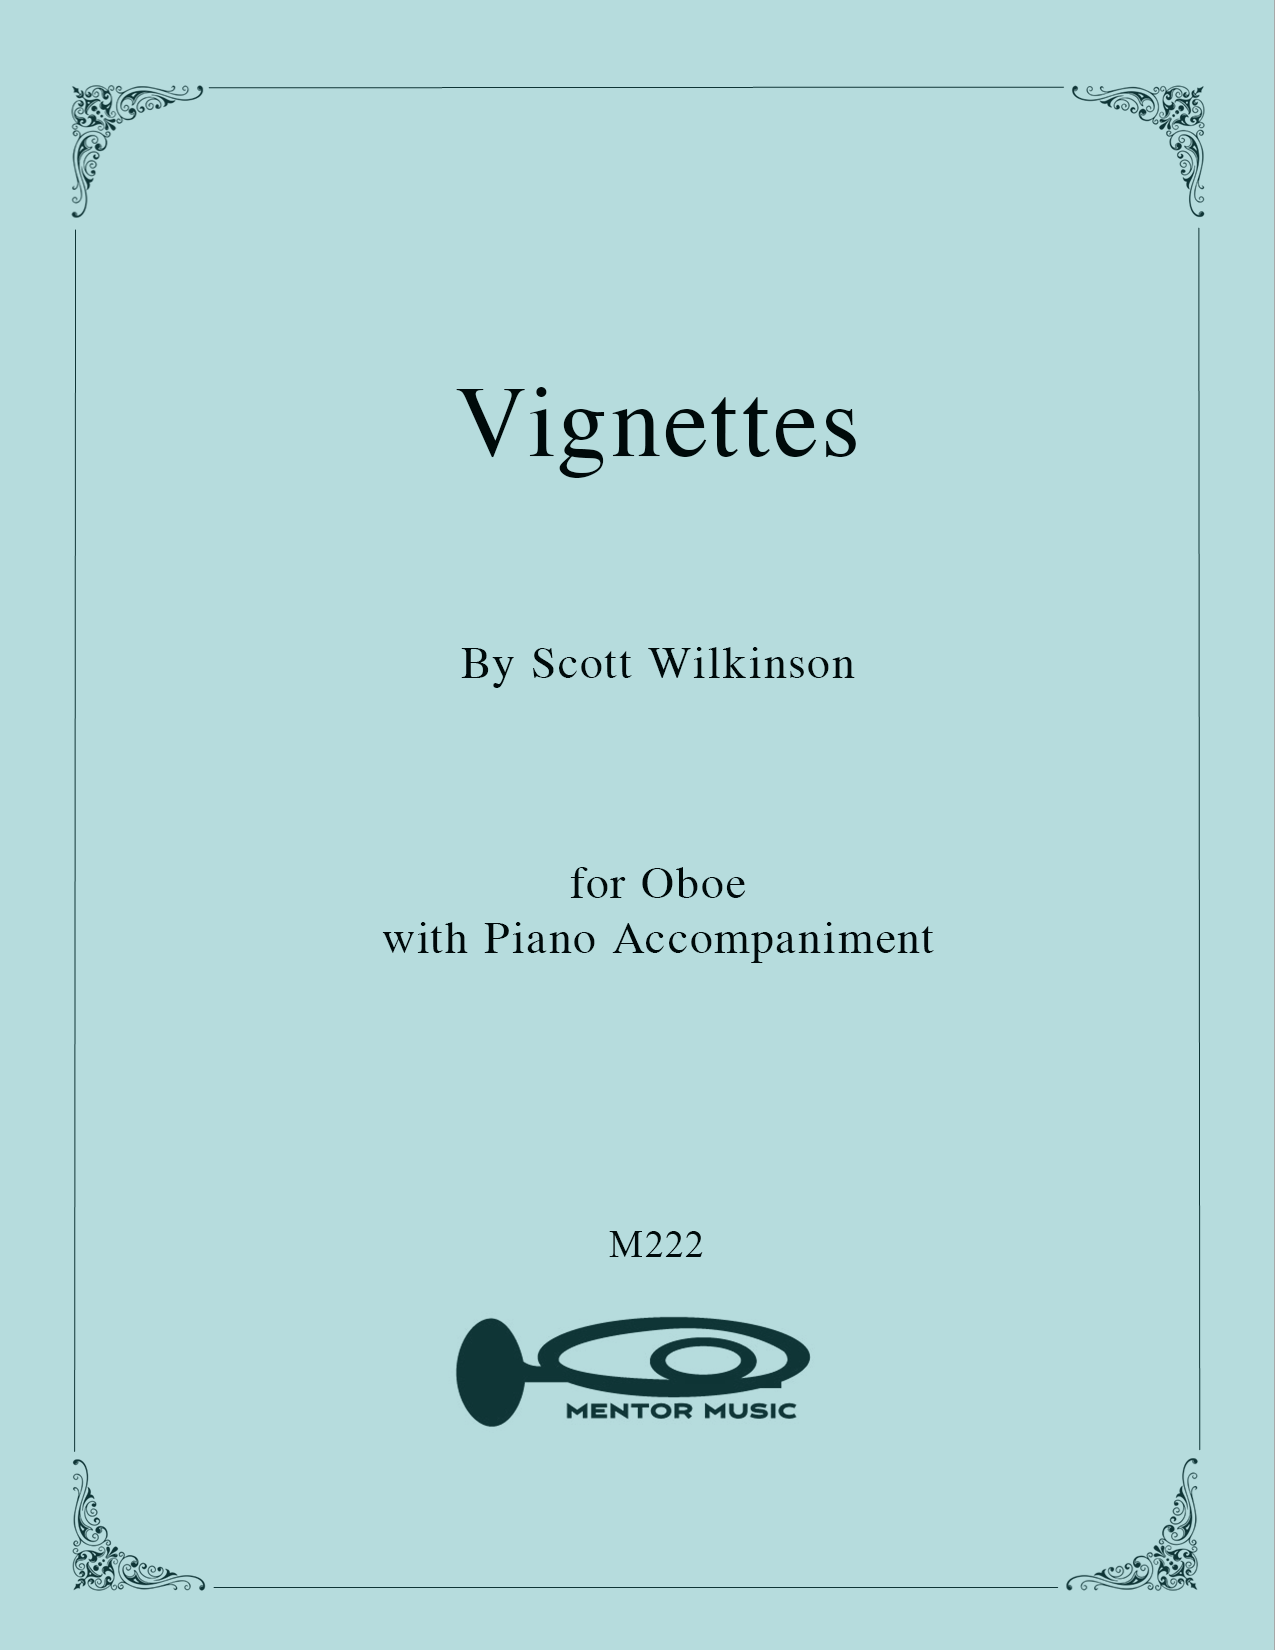 Vignettes for Oboe and Piano